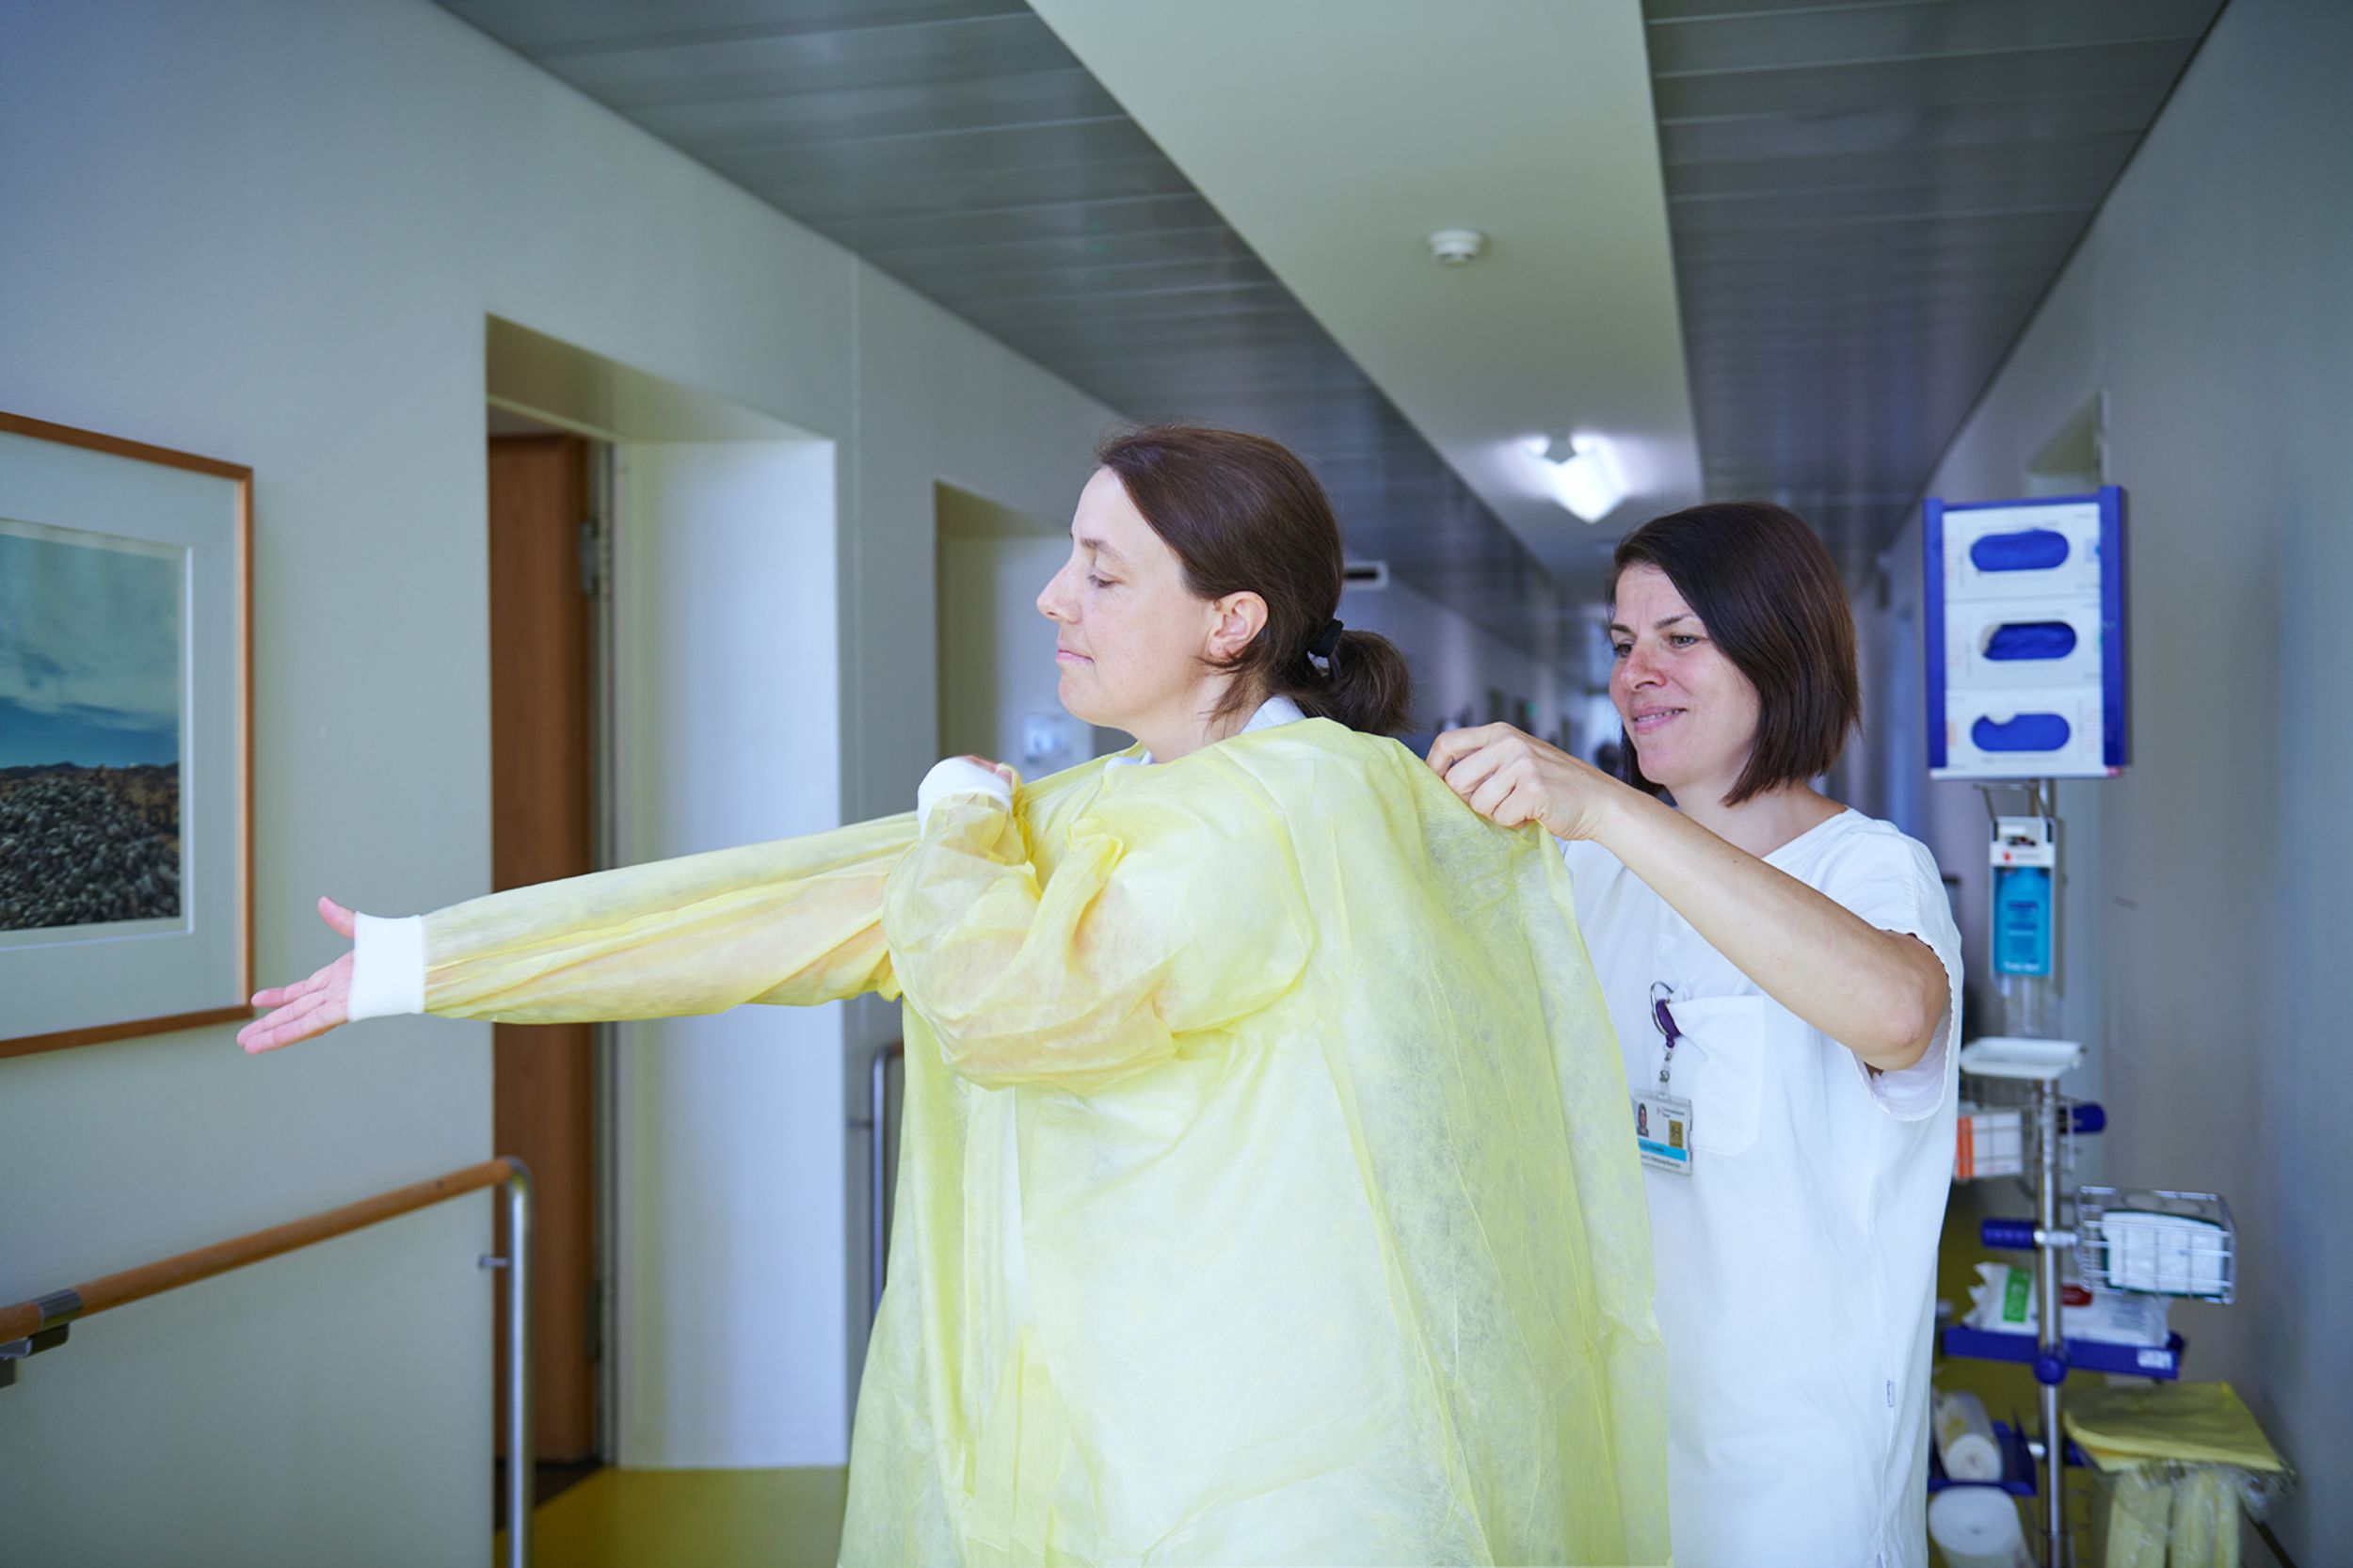 Two hospital hygiene staff help each other put on protective clothing